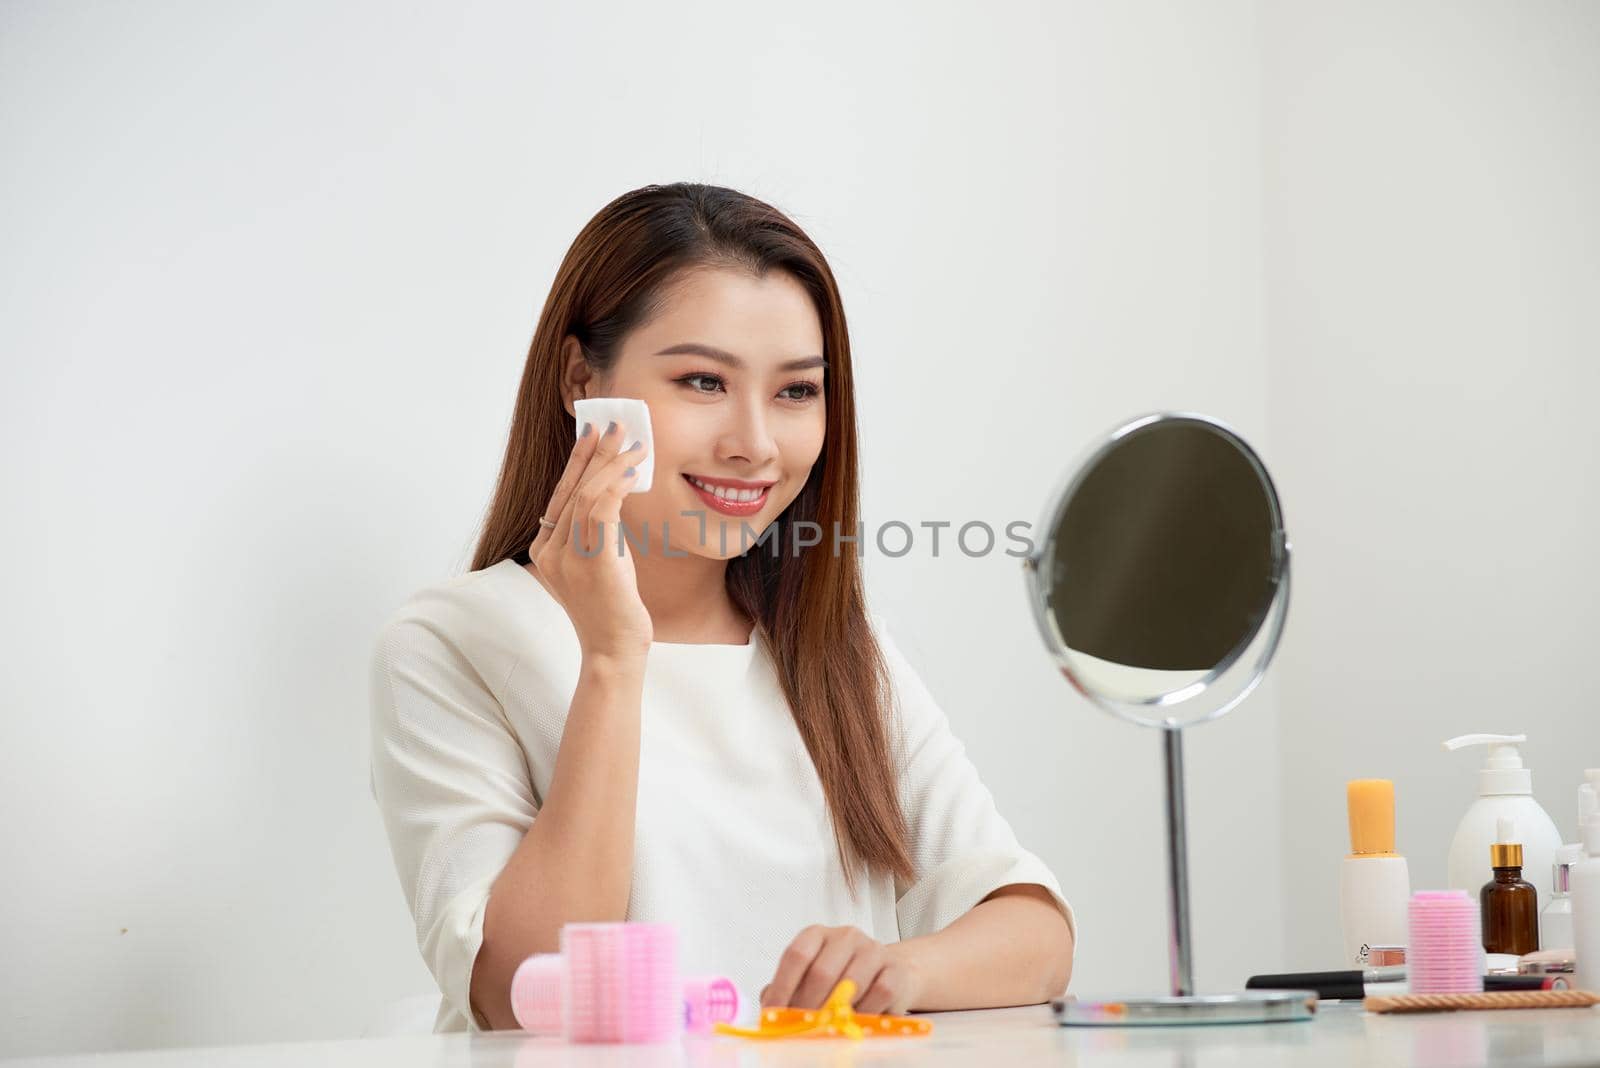 Taking off her make-up. Beautiful cheerful young woman using cotton disk and looking at her reflection in mirror with smile while sitting at the dressing table